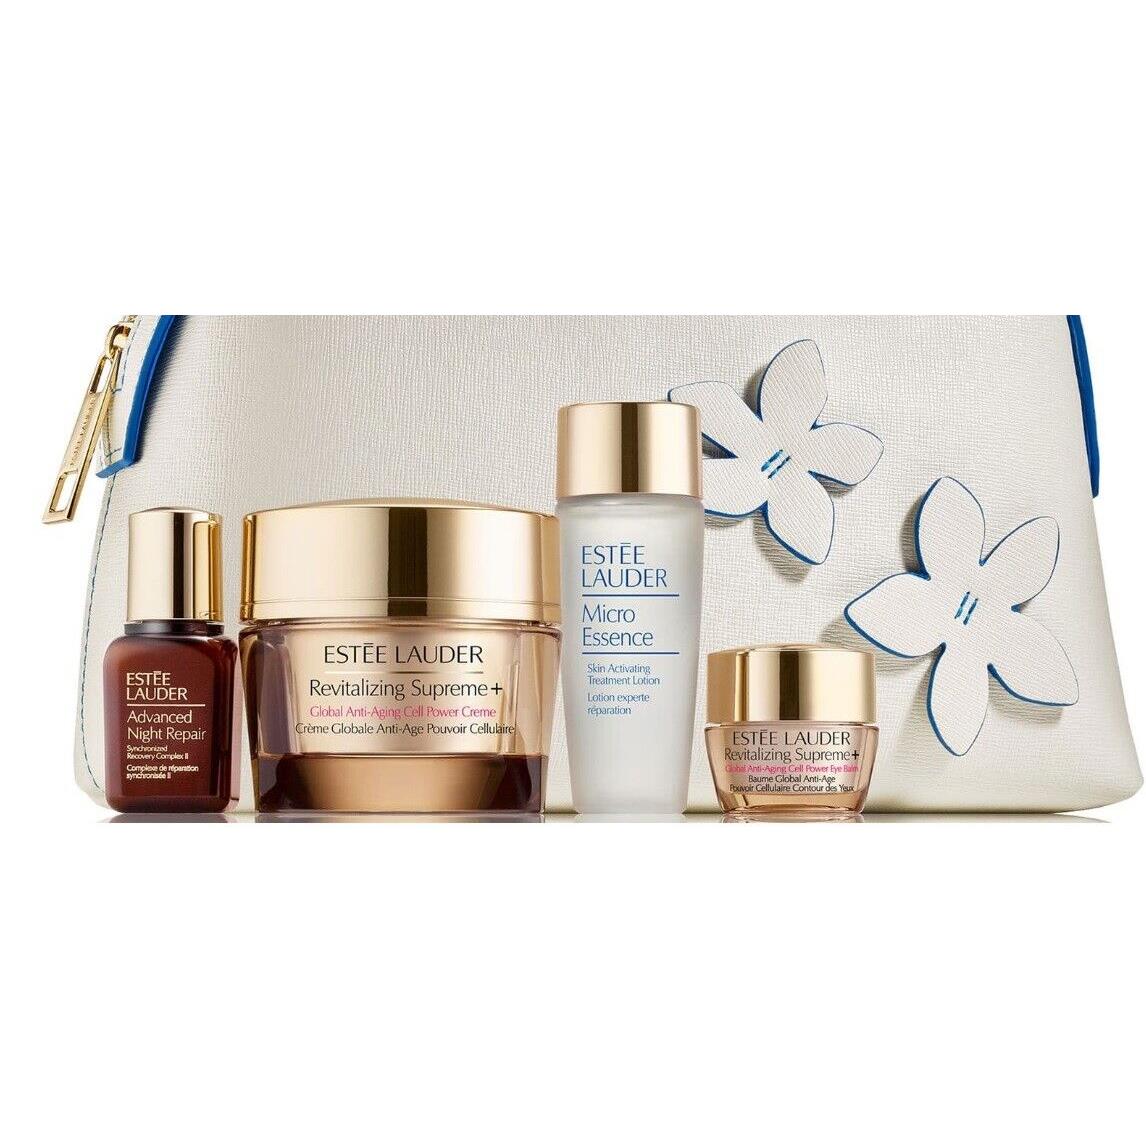 Estee Lauder 5 pc Firm and Glow For Youthful Looking Skin Set